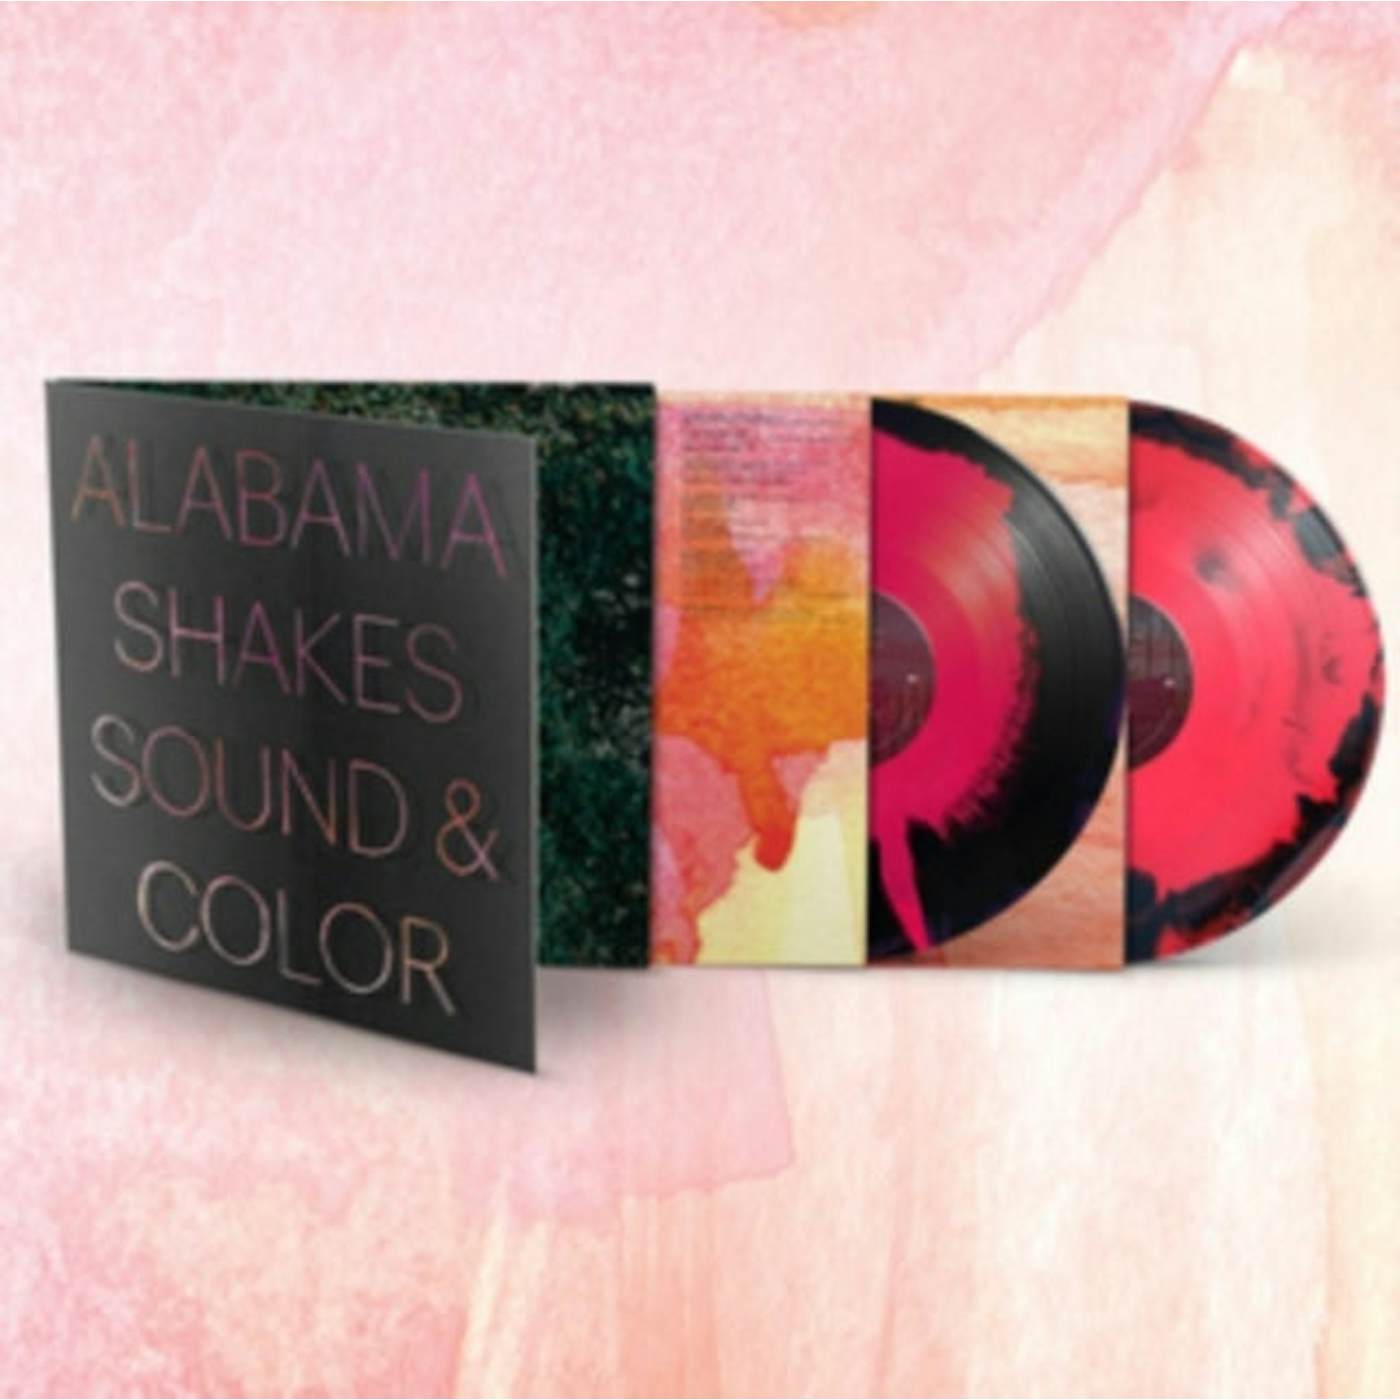 The Alabama Shakes LP Vinyl Record - Sound & Color (Deluxe Edition)